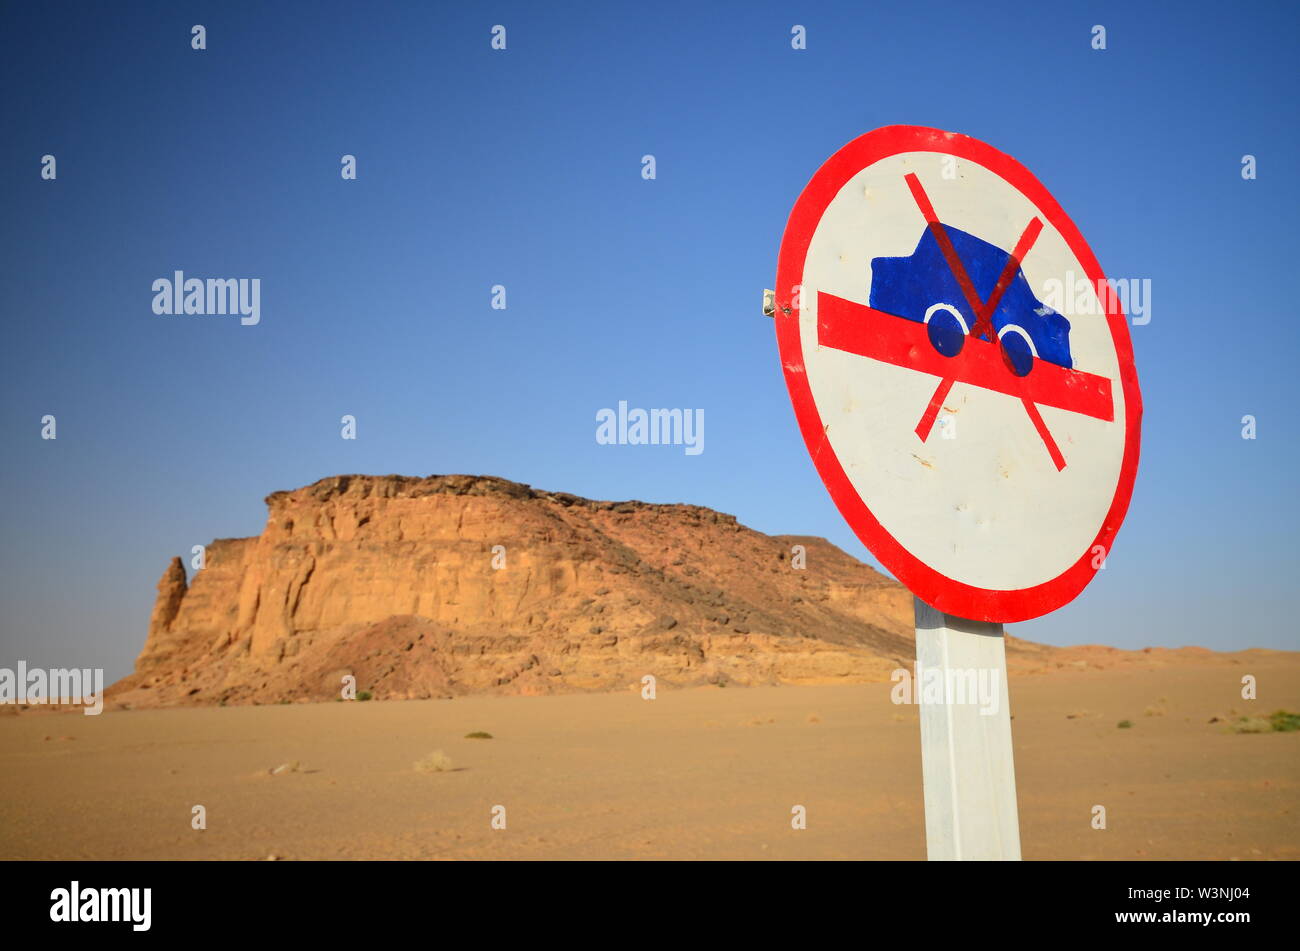 Funny Road sign in african desert Stock Photo